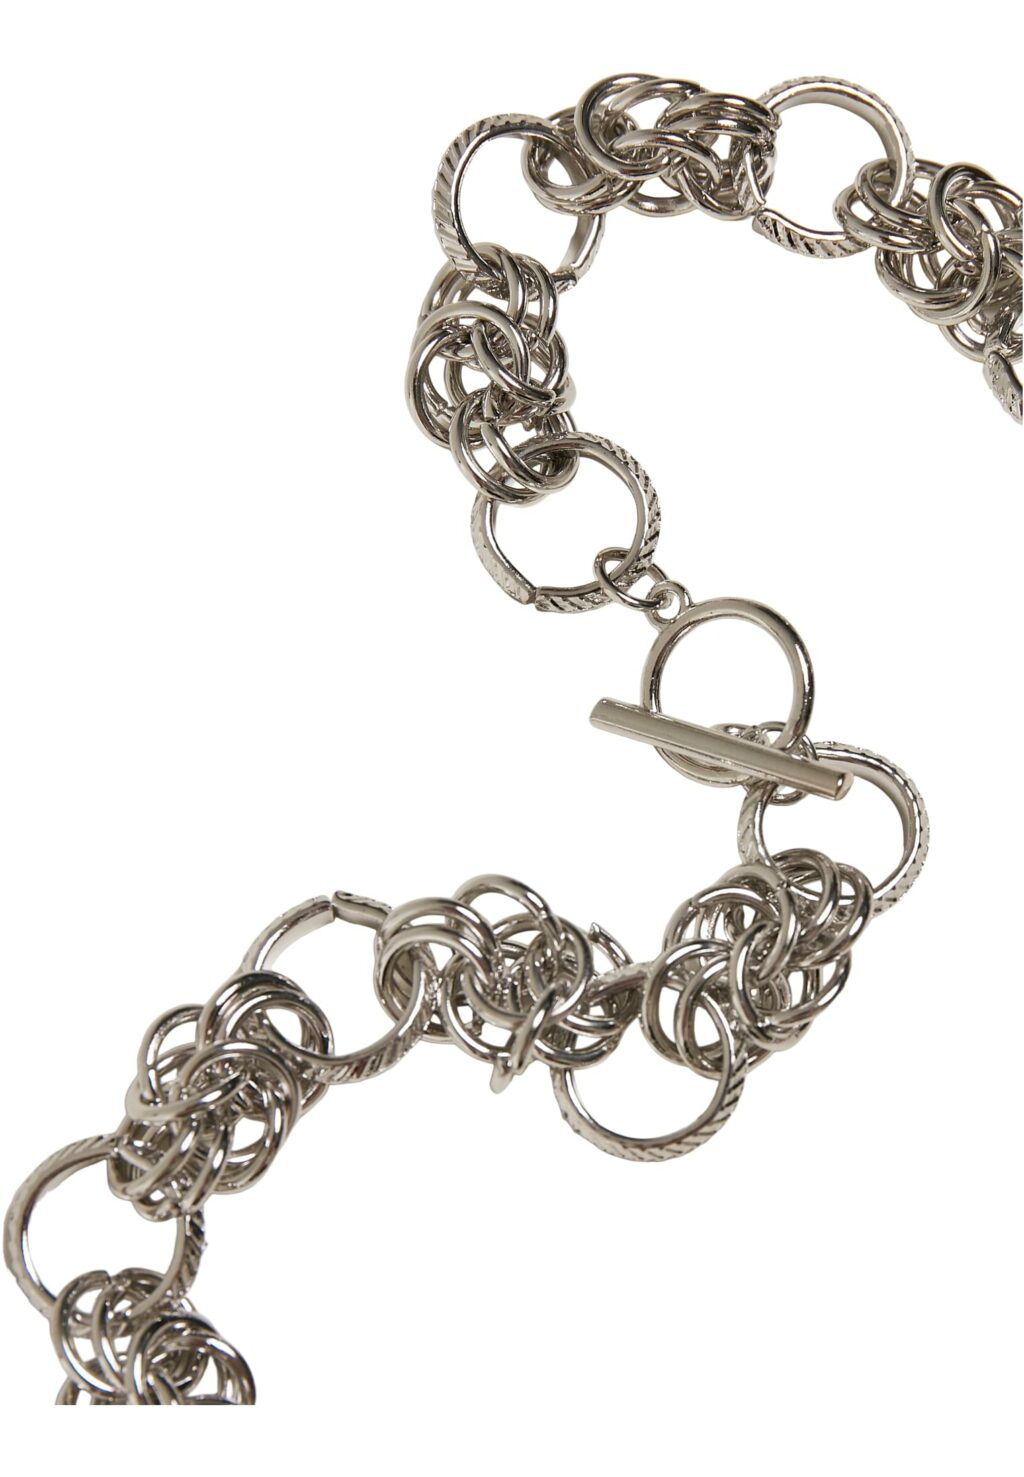 Multiring Necklace silver one TB4824